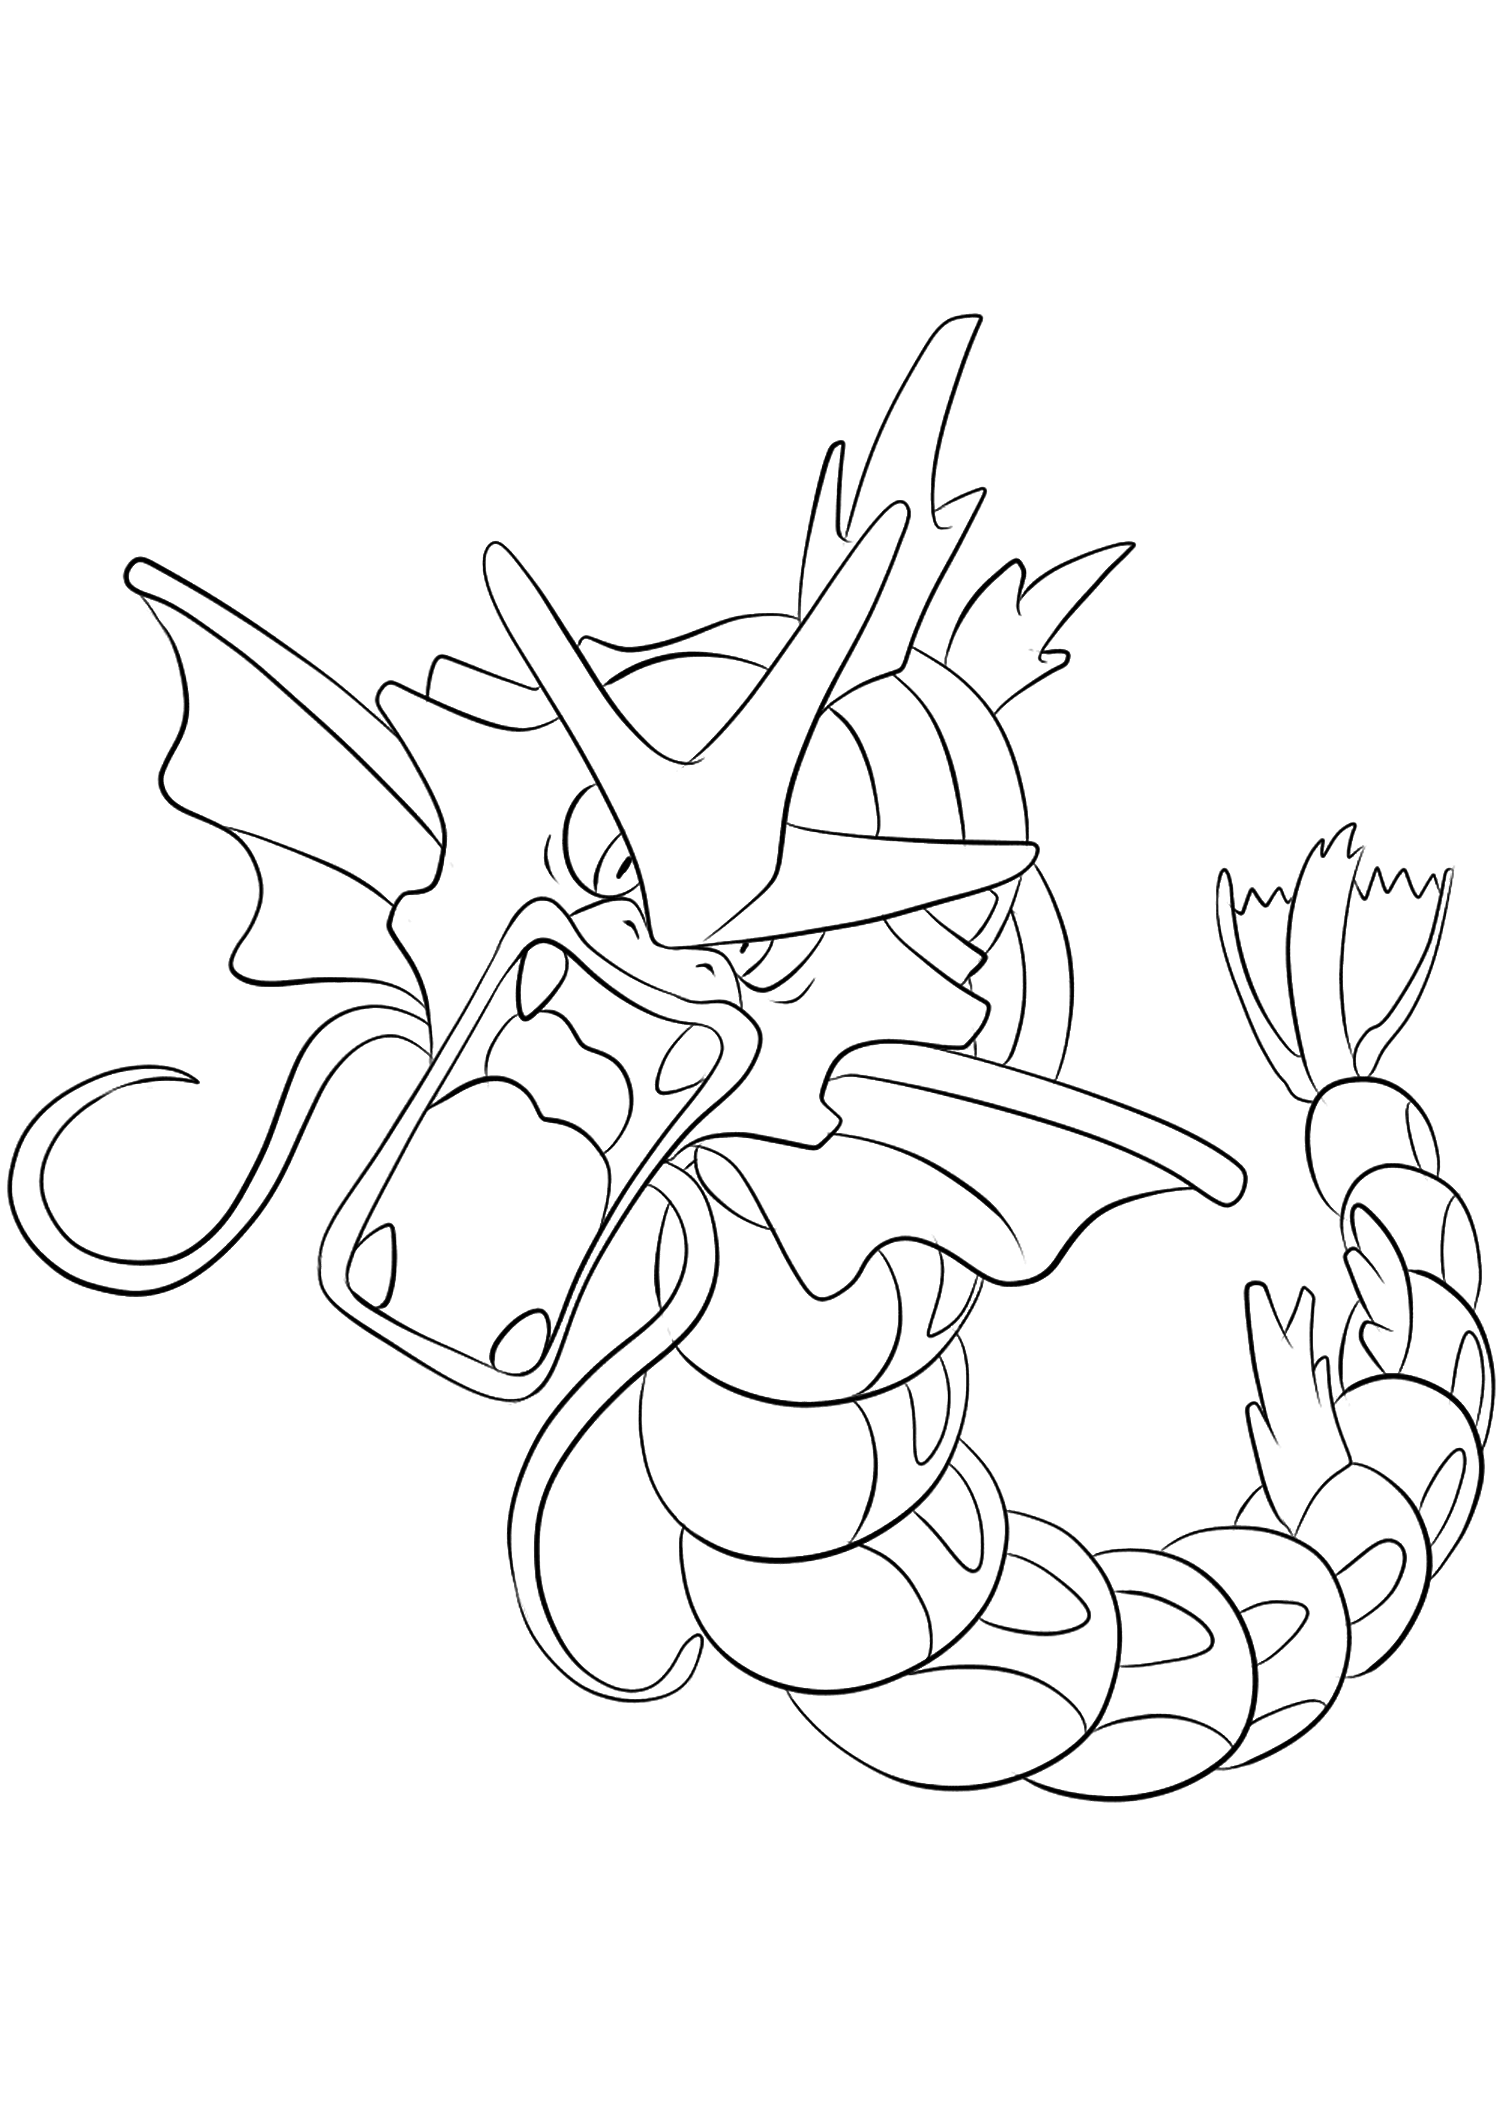 water type pokemon coloring pages